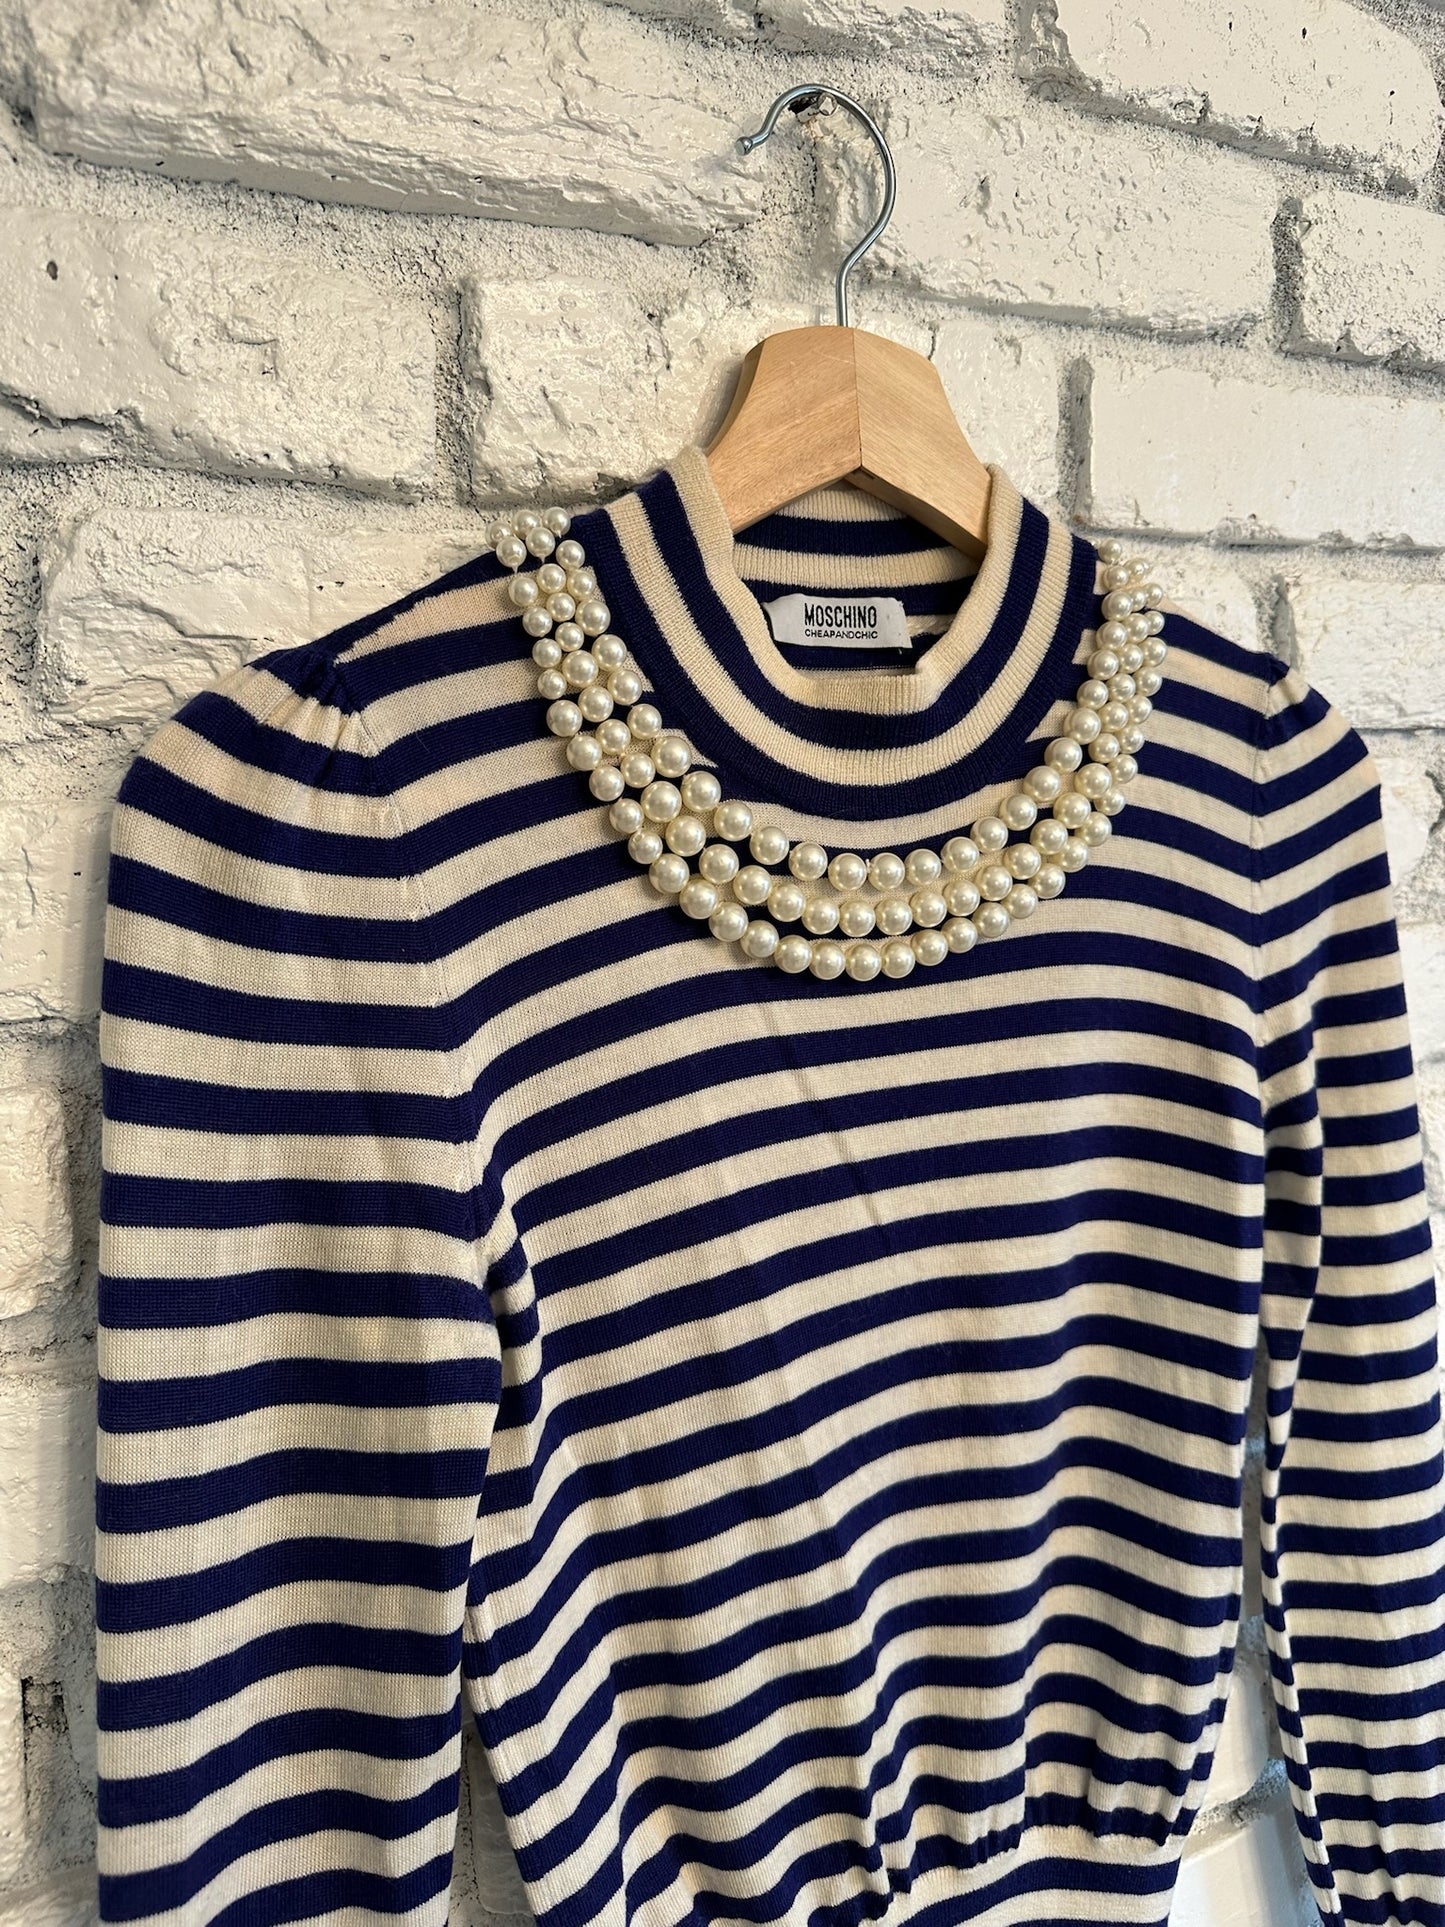 The Giselle Moschino Striped Sweater